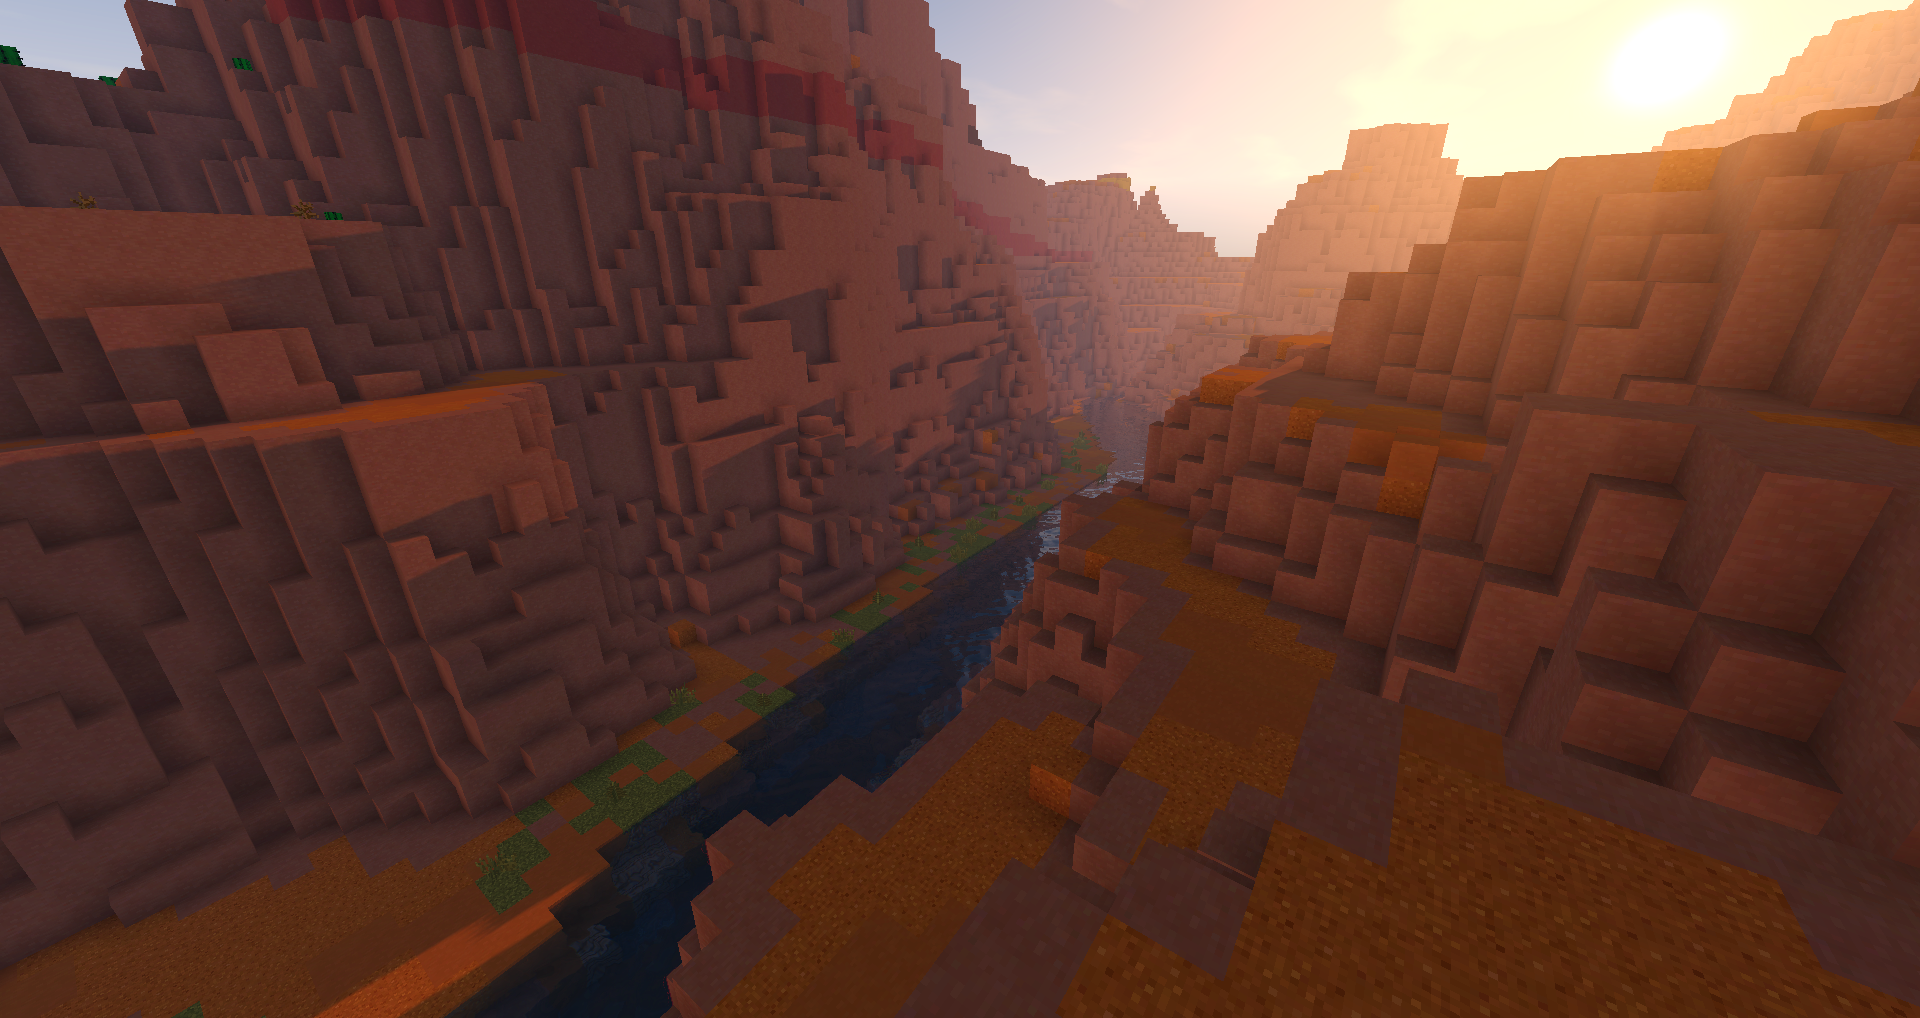 In the image is a canyon shown in the game minecraft. At the bottom of the canyon you can see a river and next to it some grass, while the rest is build our of clay